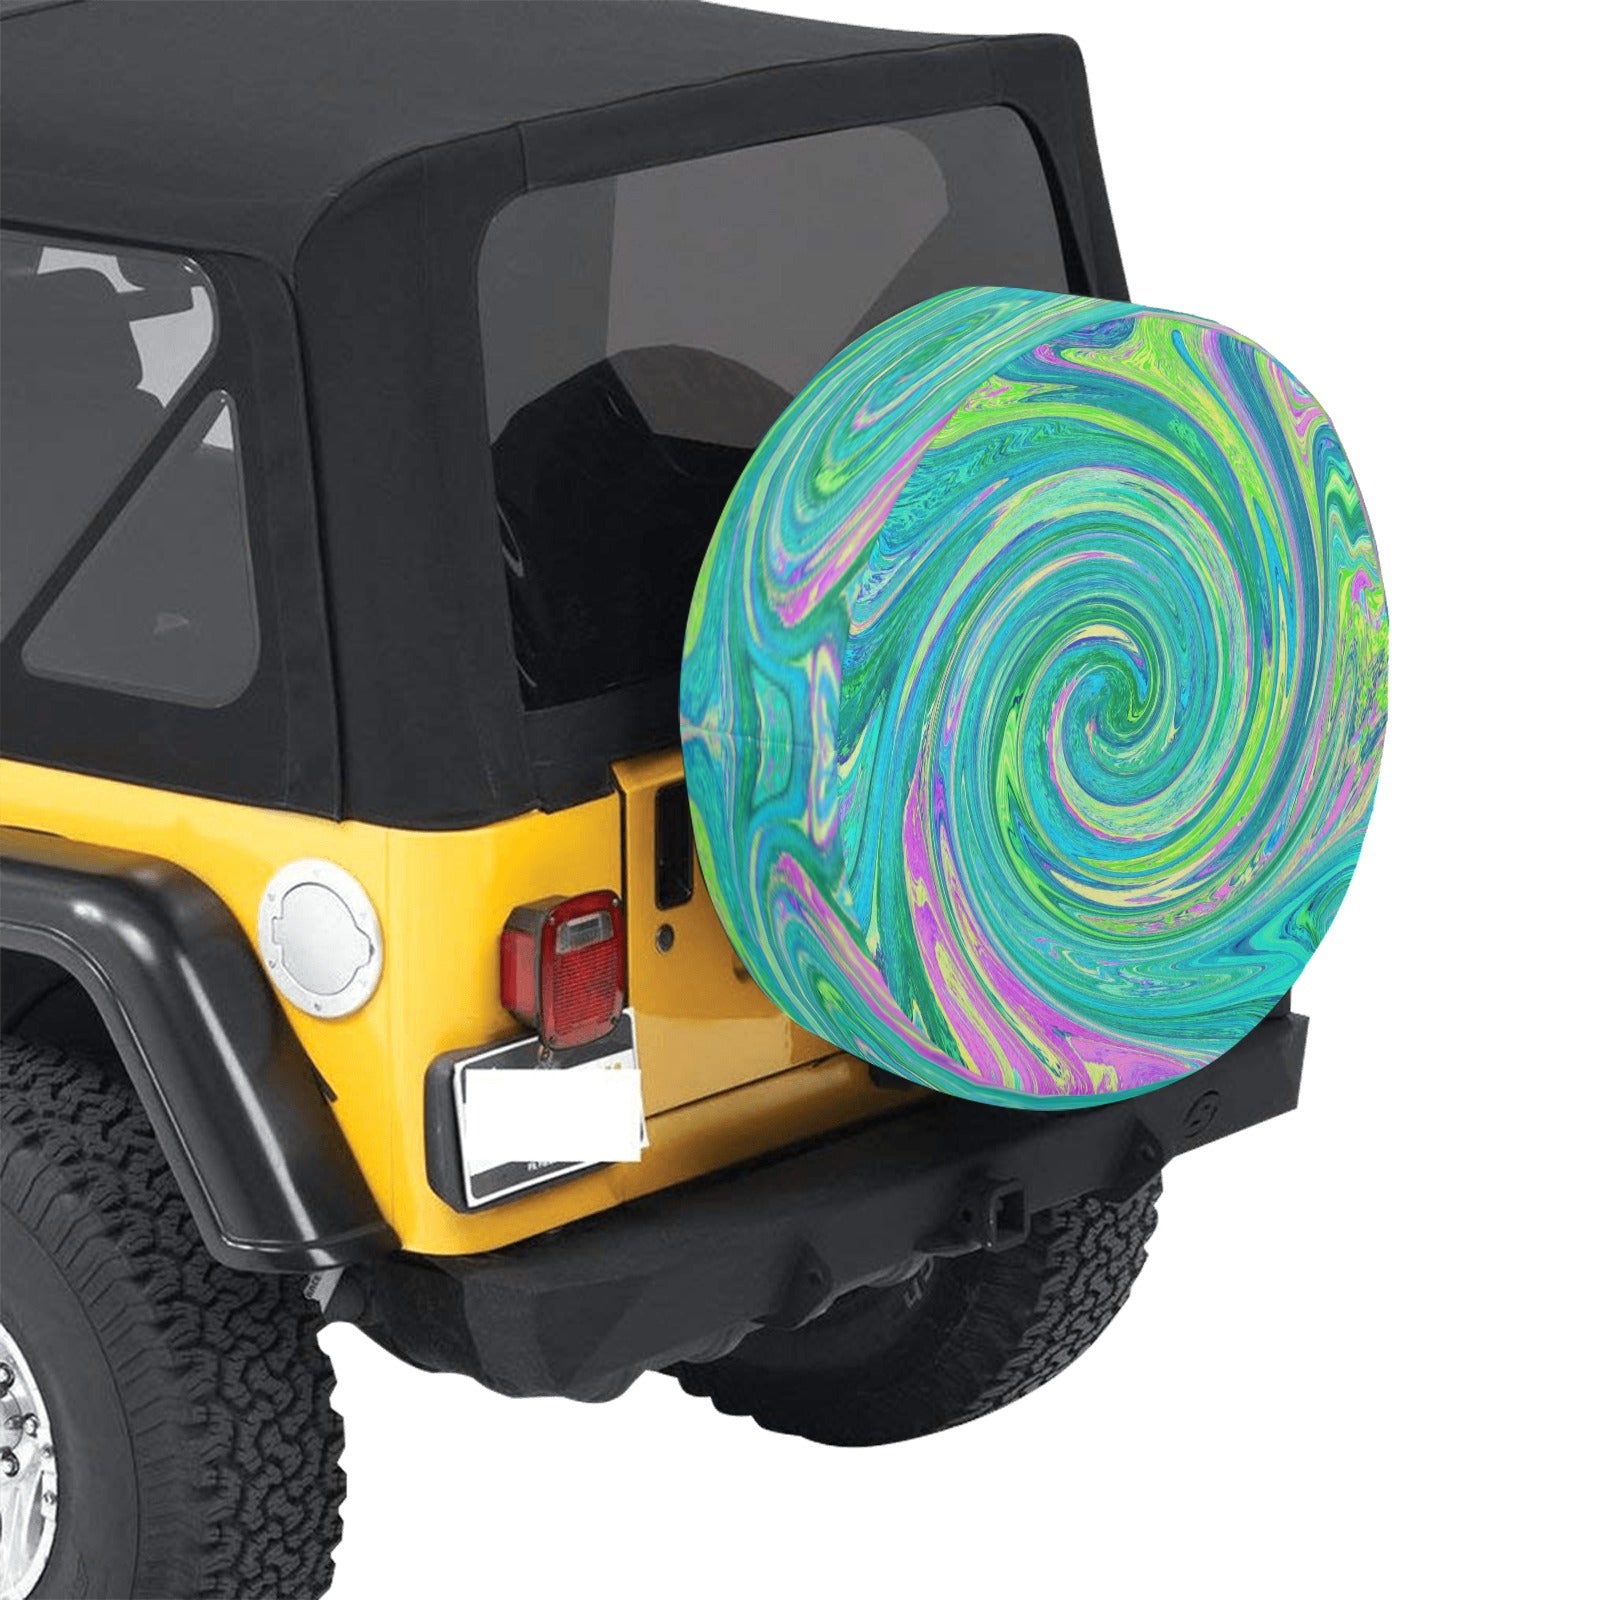 Spare Tire Covers, Groovy Abstract Retro Aquamarine Swirl - Small